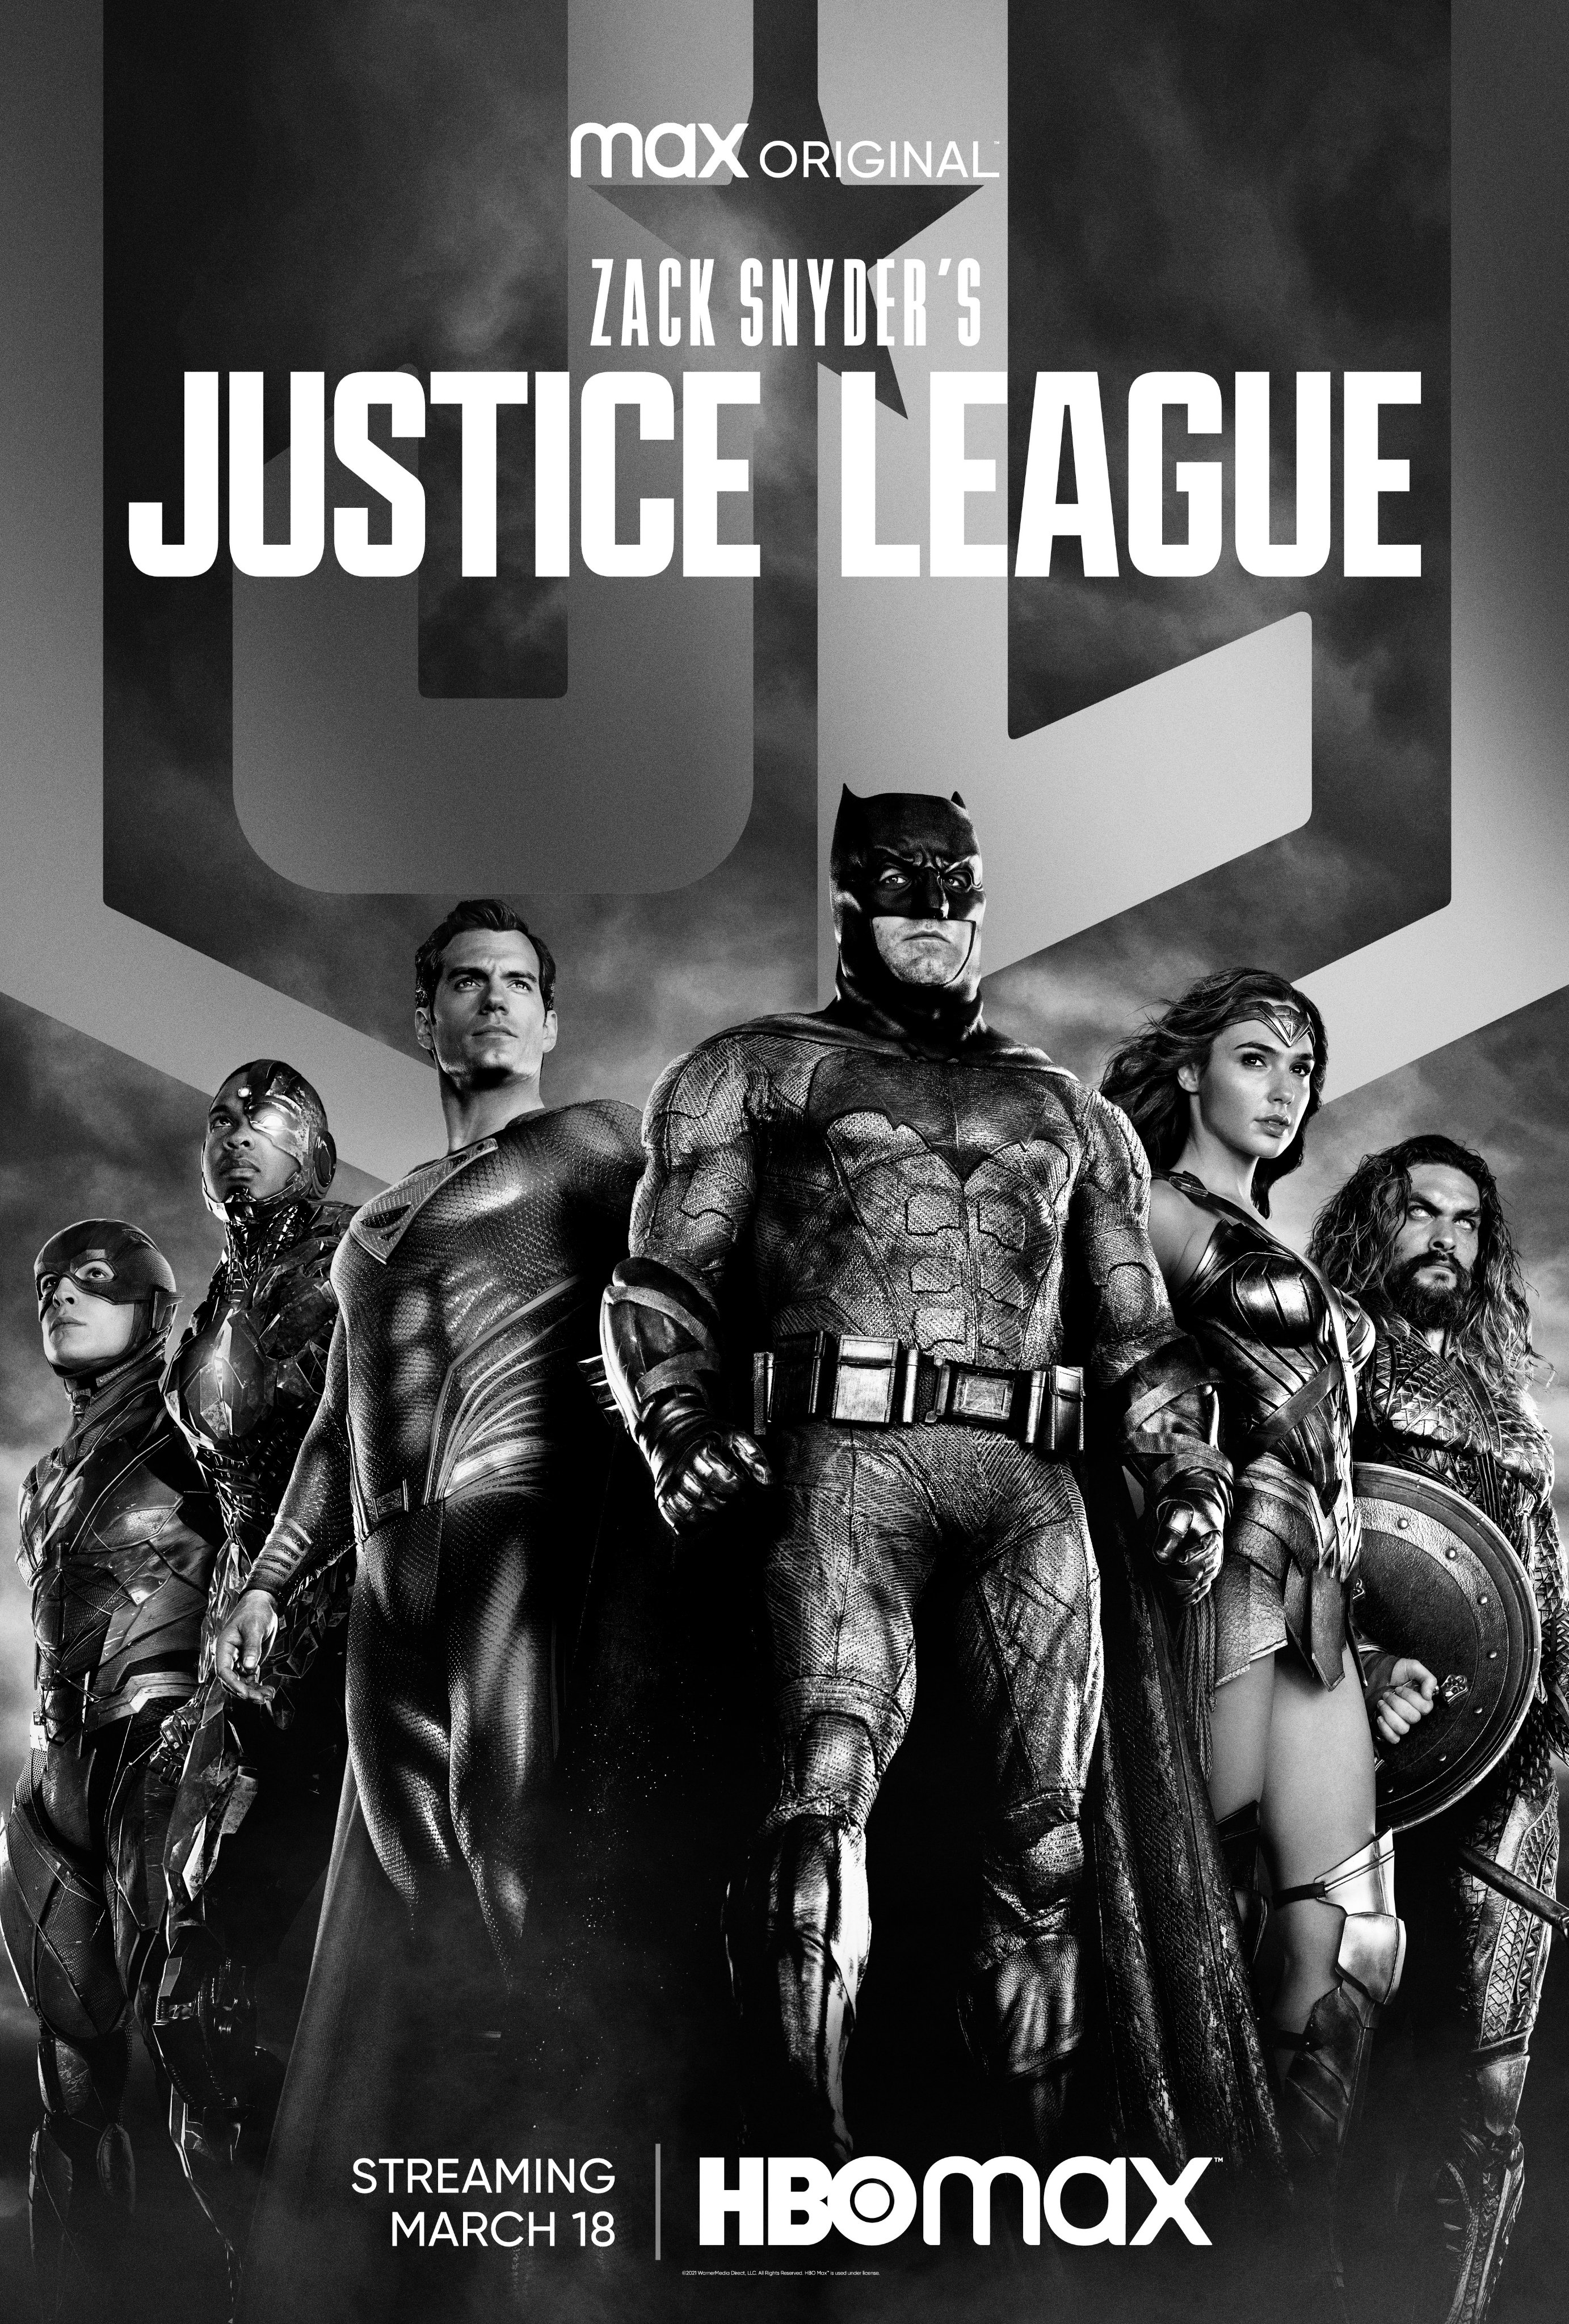 Hbo Justice League Synder Cut 2021 Wallpapers